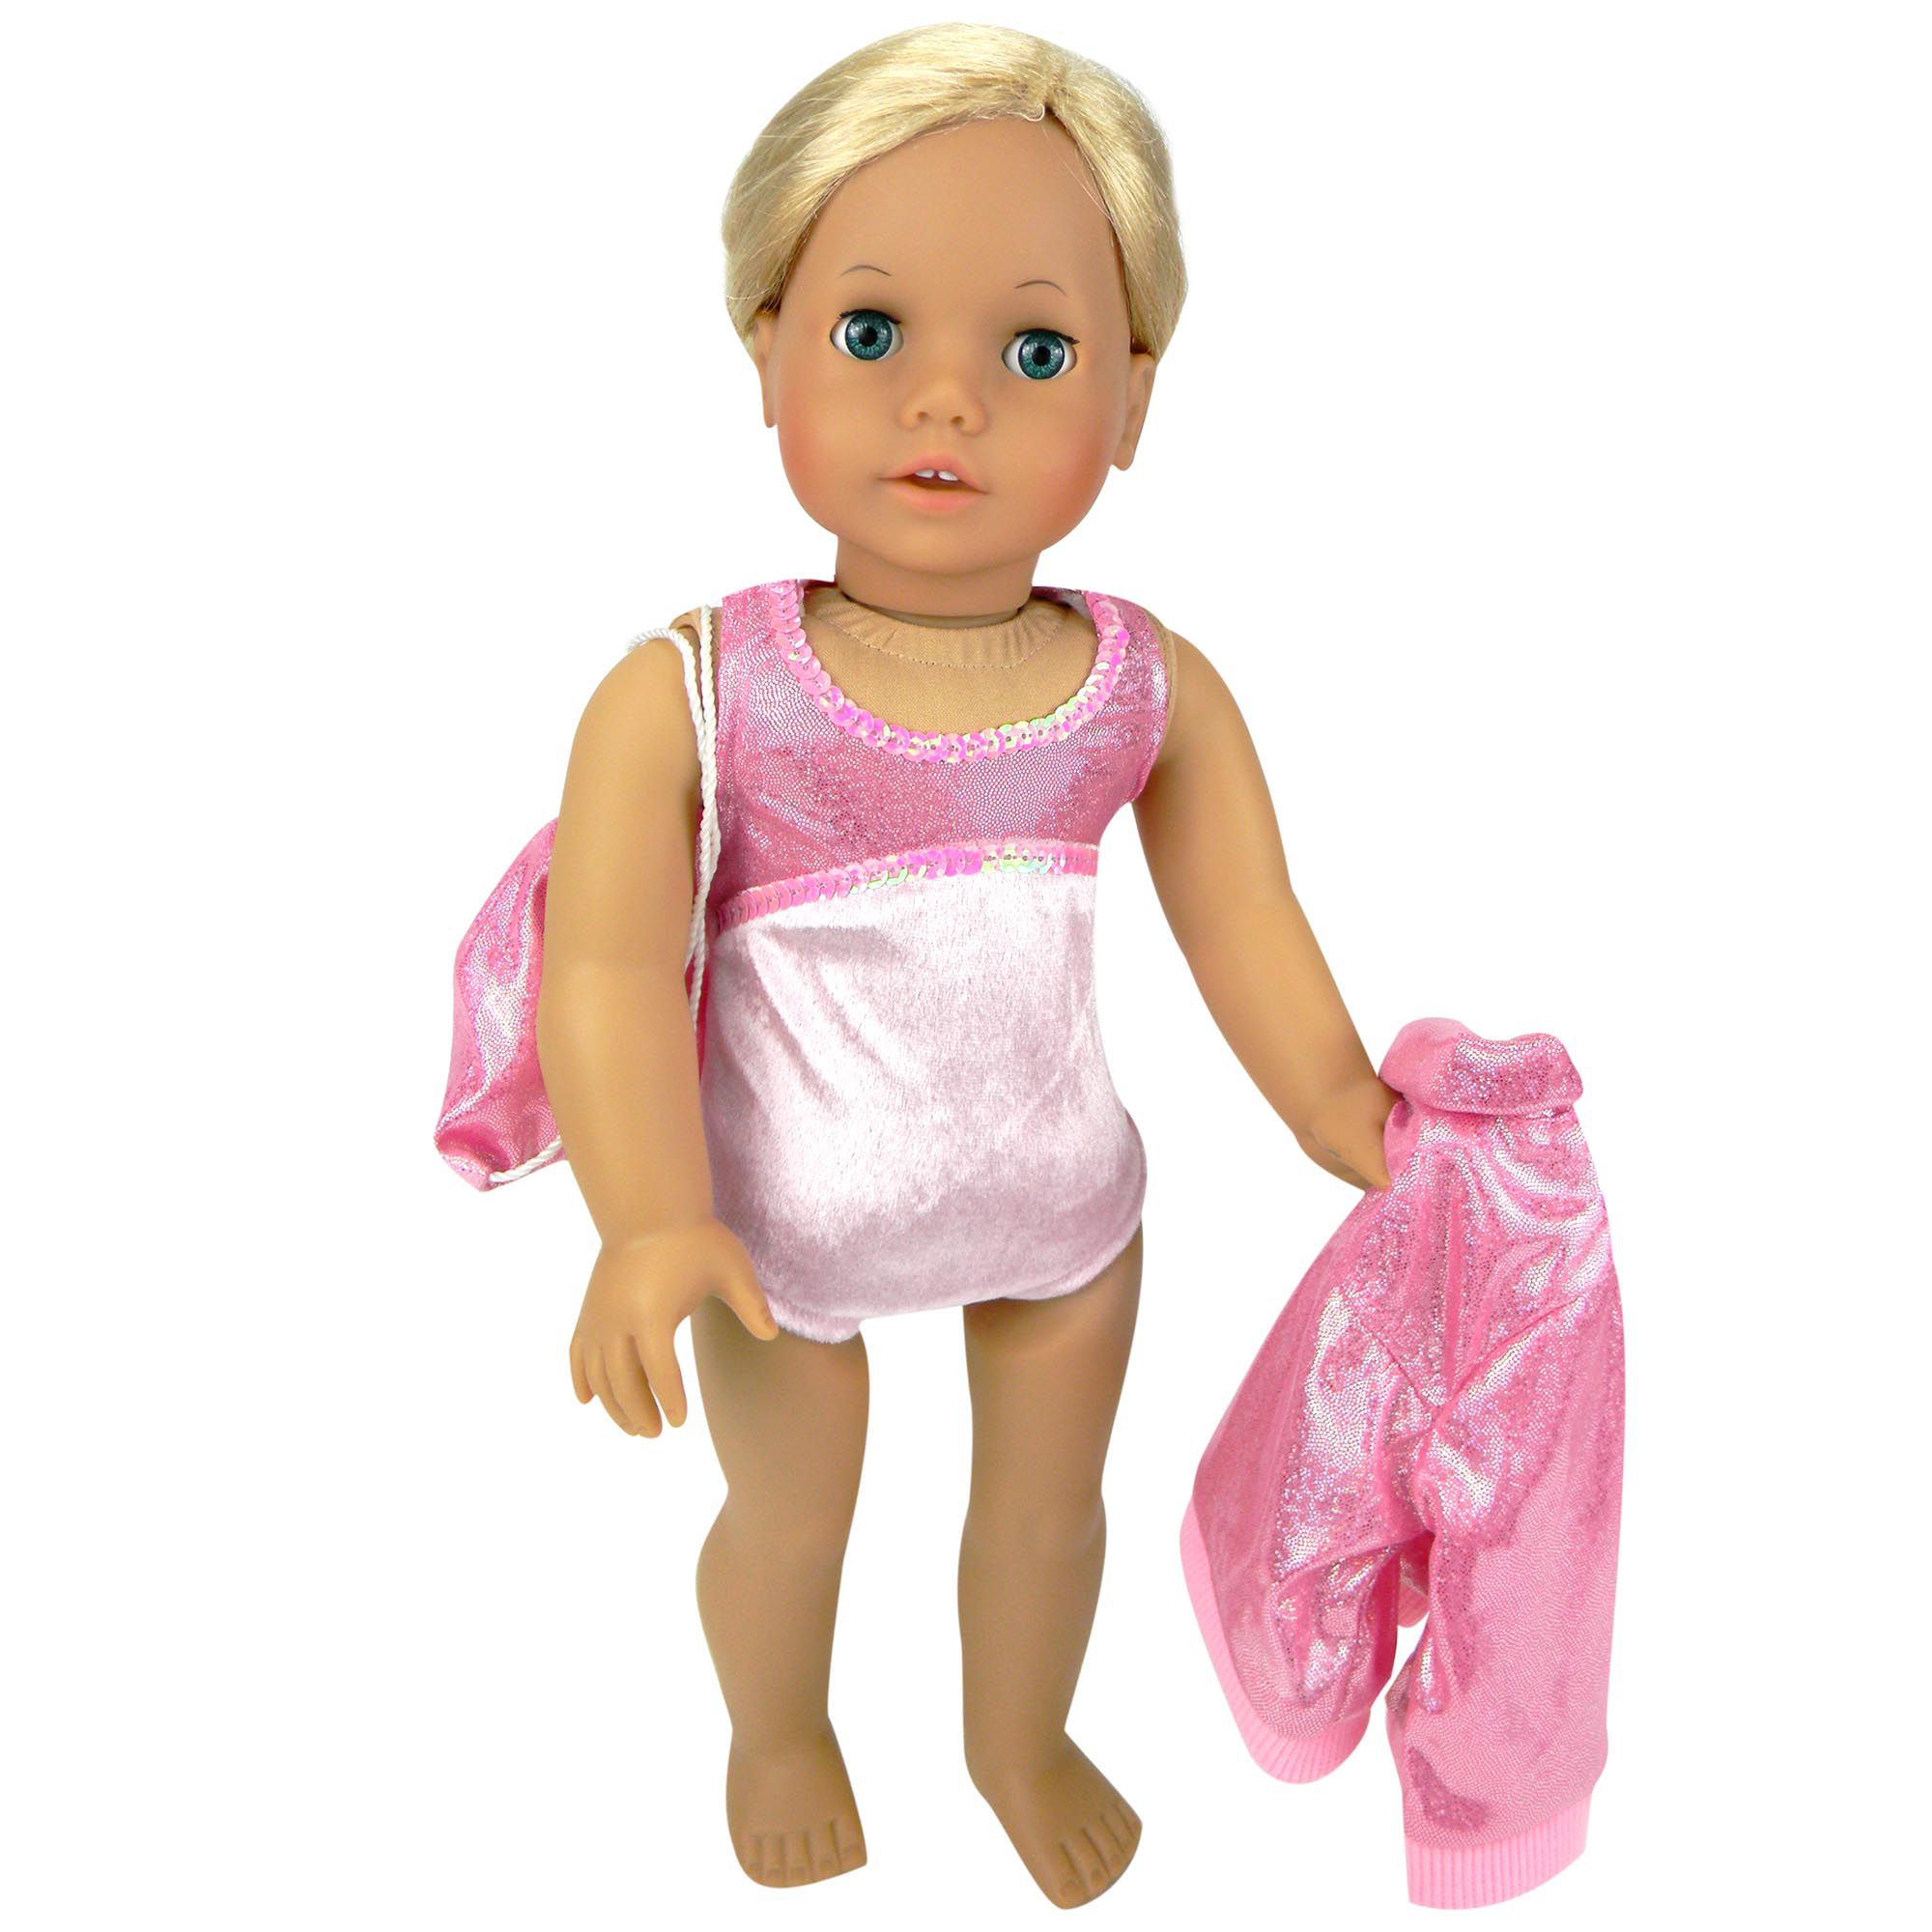 18 inch Doll Gymnastics Outfit Neon Pink - Compatible with18 inch Dolls  Clothes and Accessories (4 Pieces in All) 